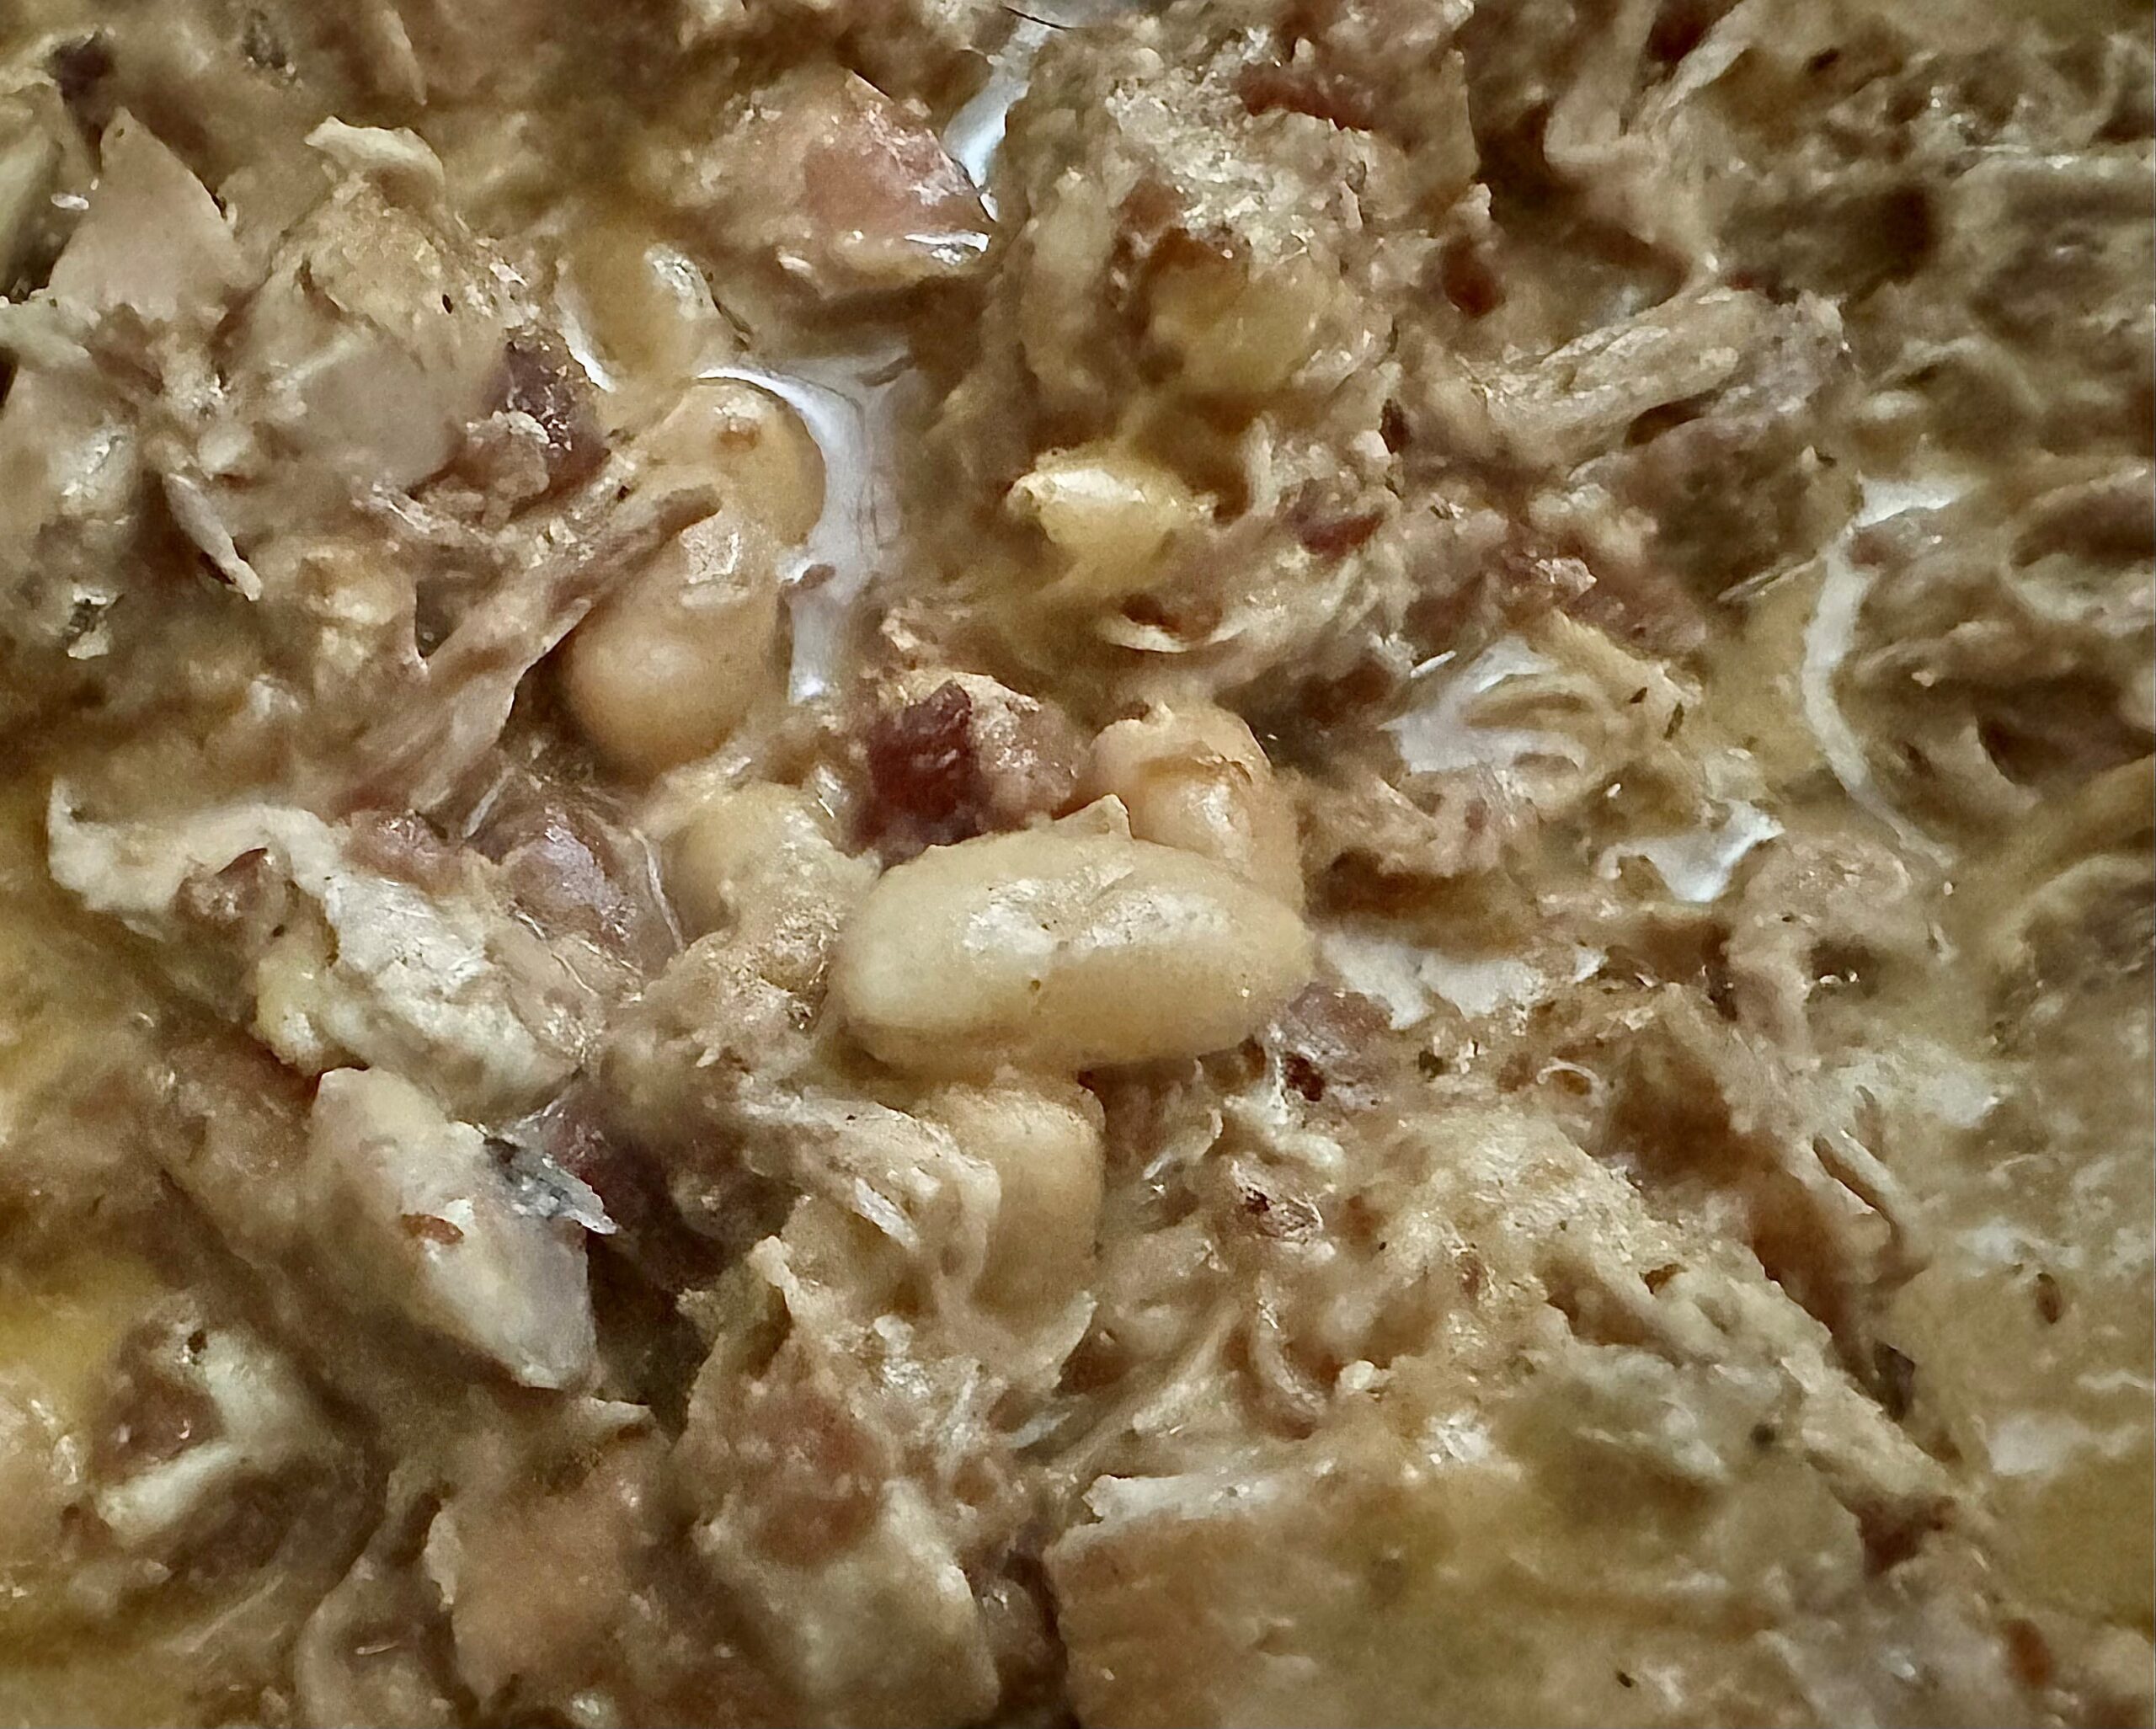 The ultimate white pheasant chili thanks to French Brittany dogs that make it possible